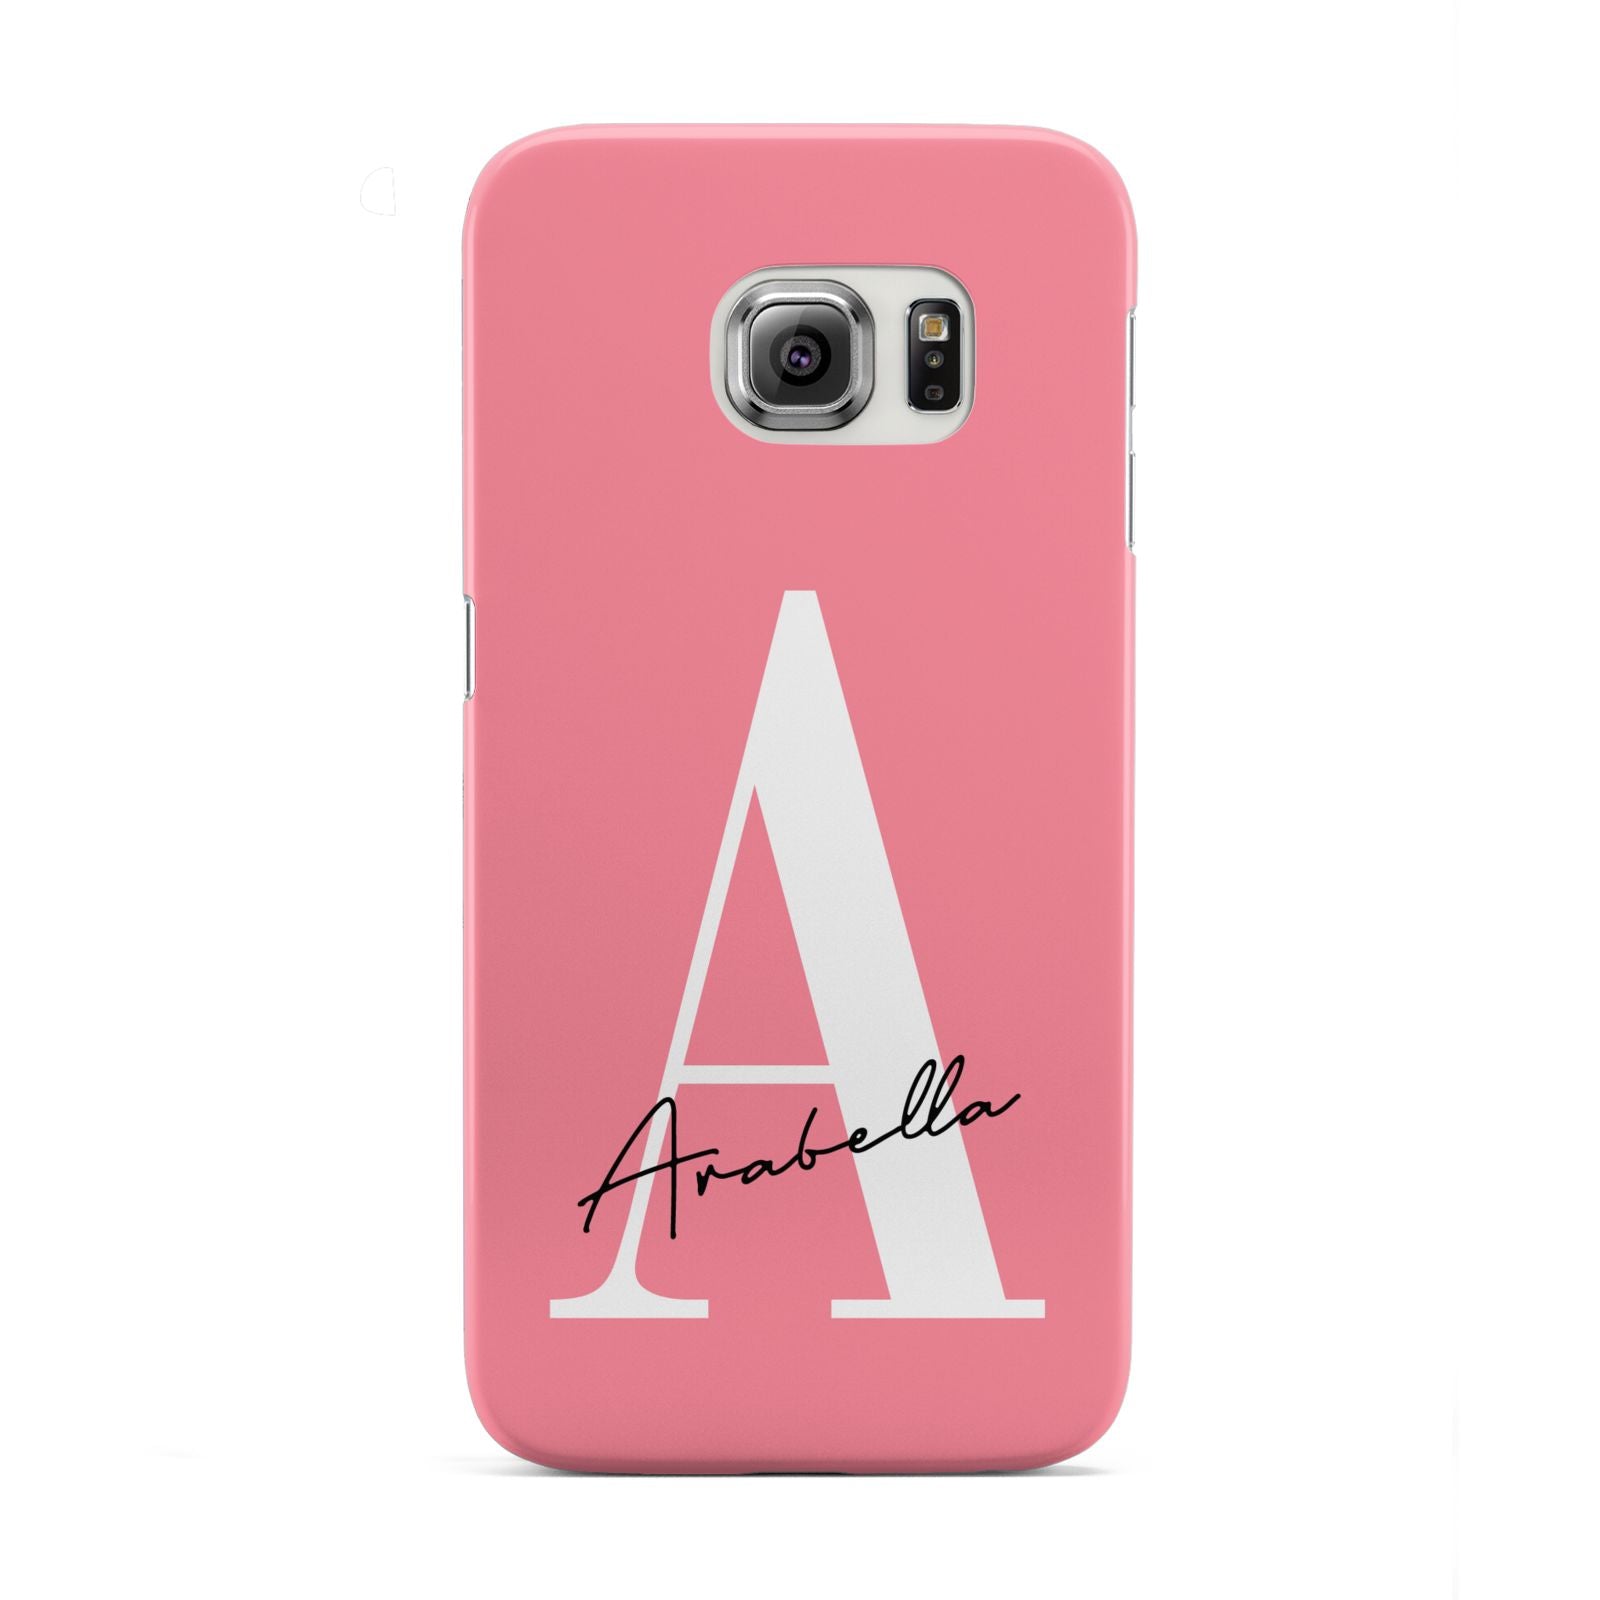 Personalised Pink White Initial Samsung Galaxy S6 Edge Case